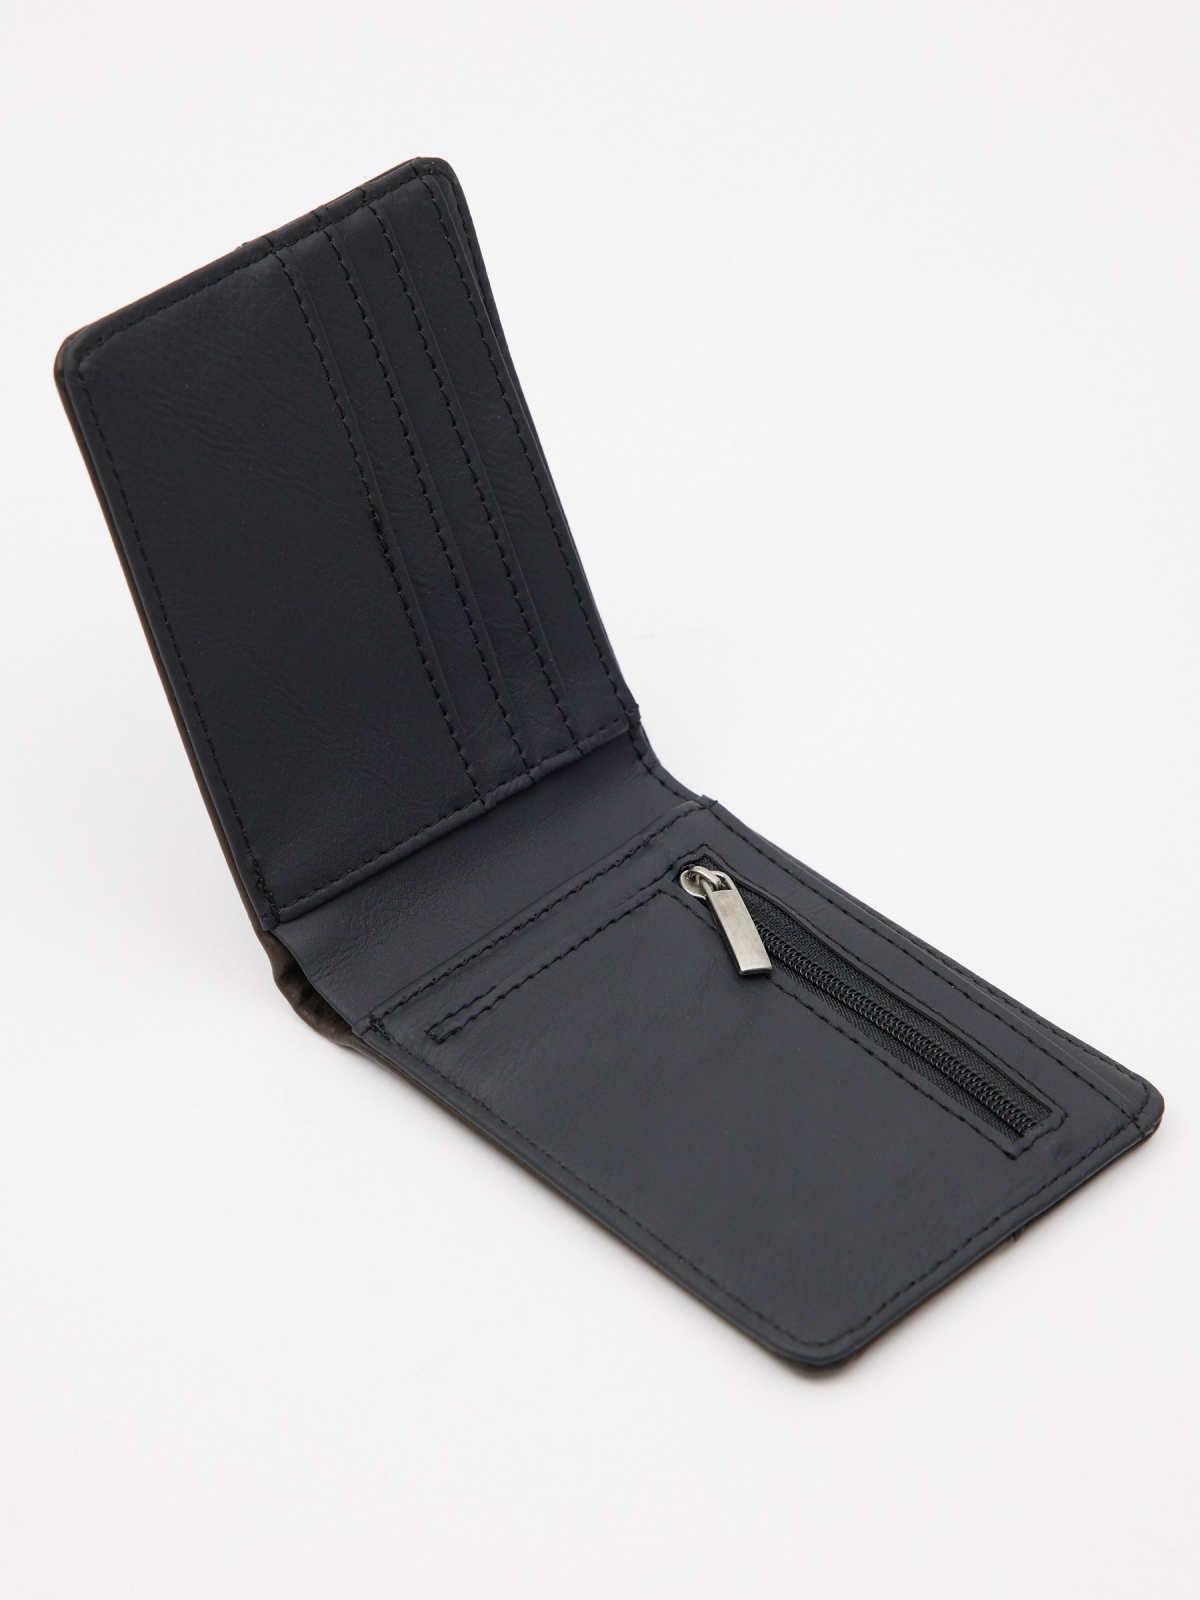 Two-tone faux leather wallet black interior view